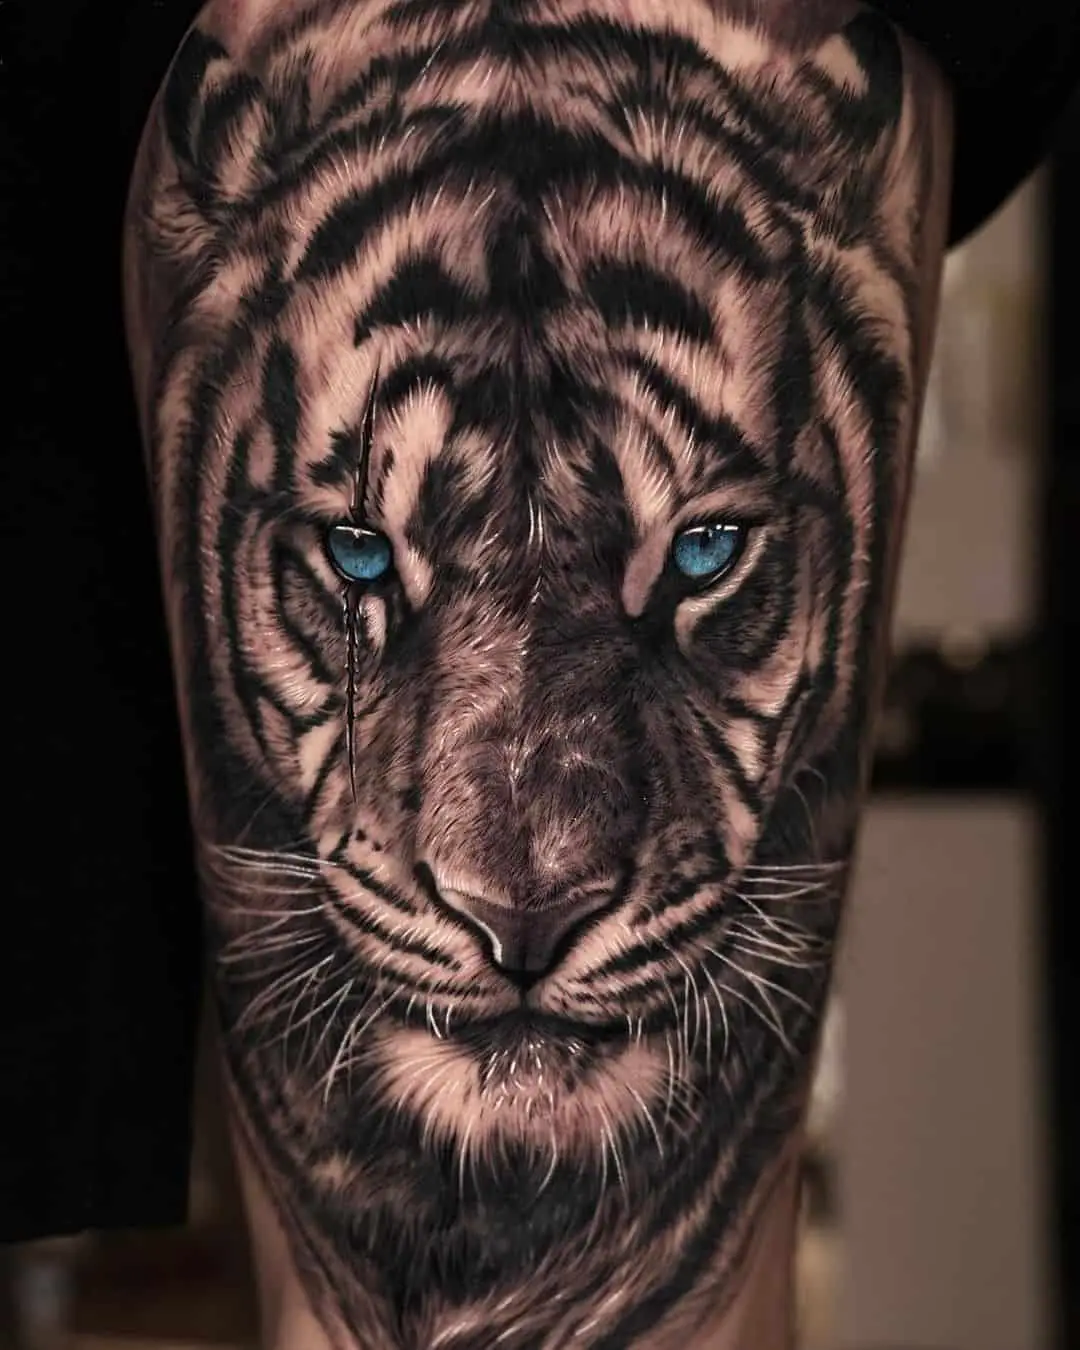 Neotraditional style tiger face tattoo on the right